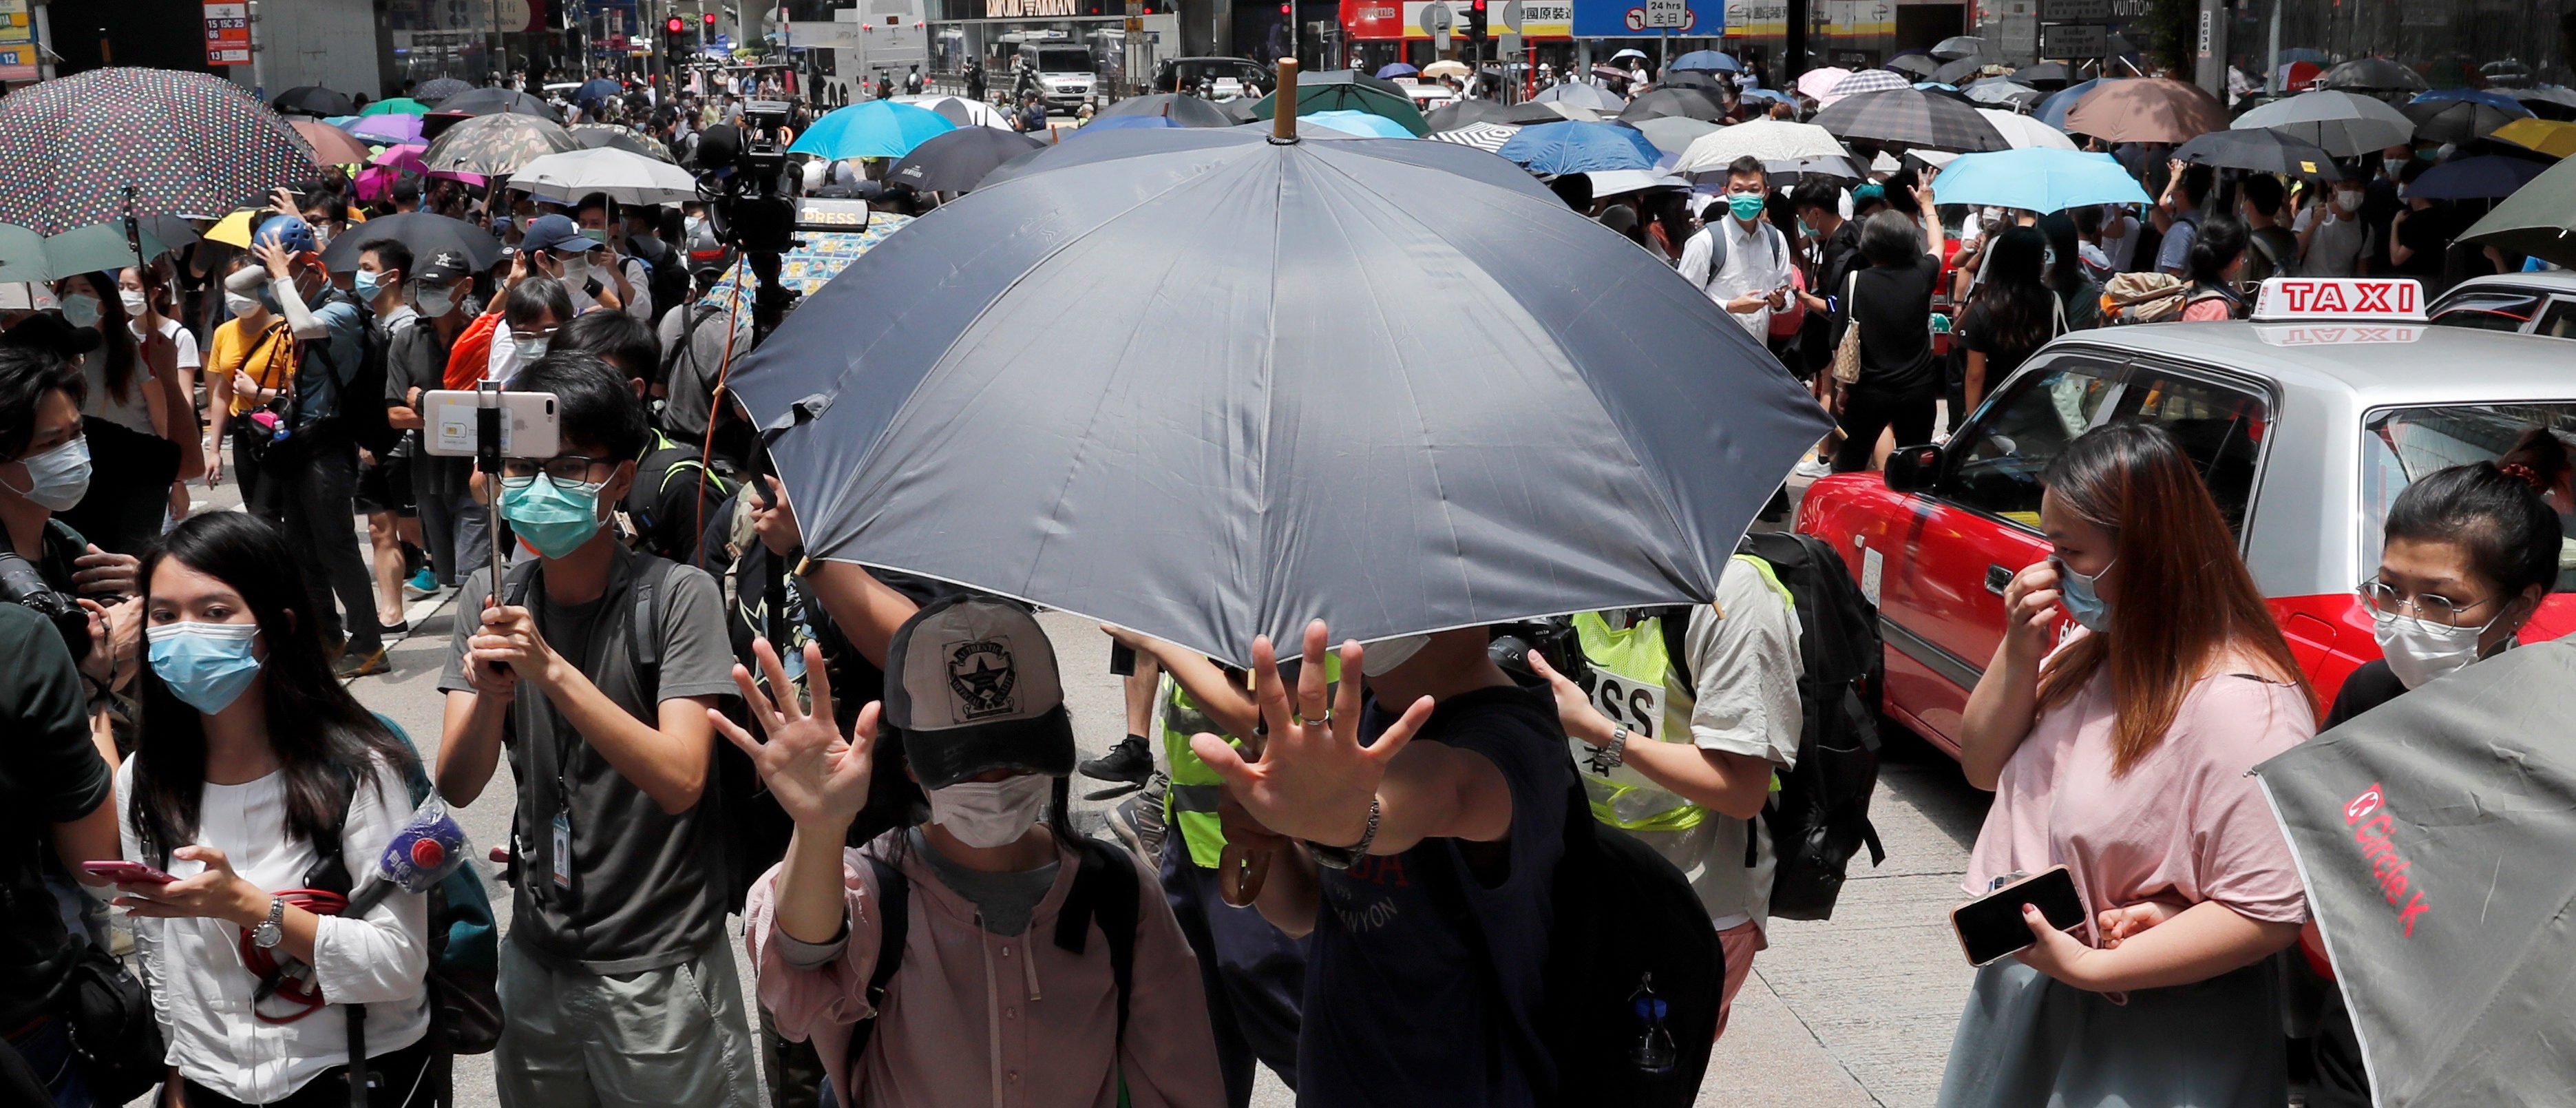 People wearing face masks take part in a protest against the second reading of a controversial national anthem law in Hong Kong, China May 27, 2020. REUTERS/Tyrone Siu - RC2UWG9P3TP6